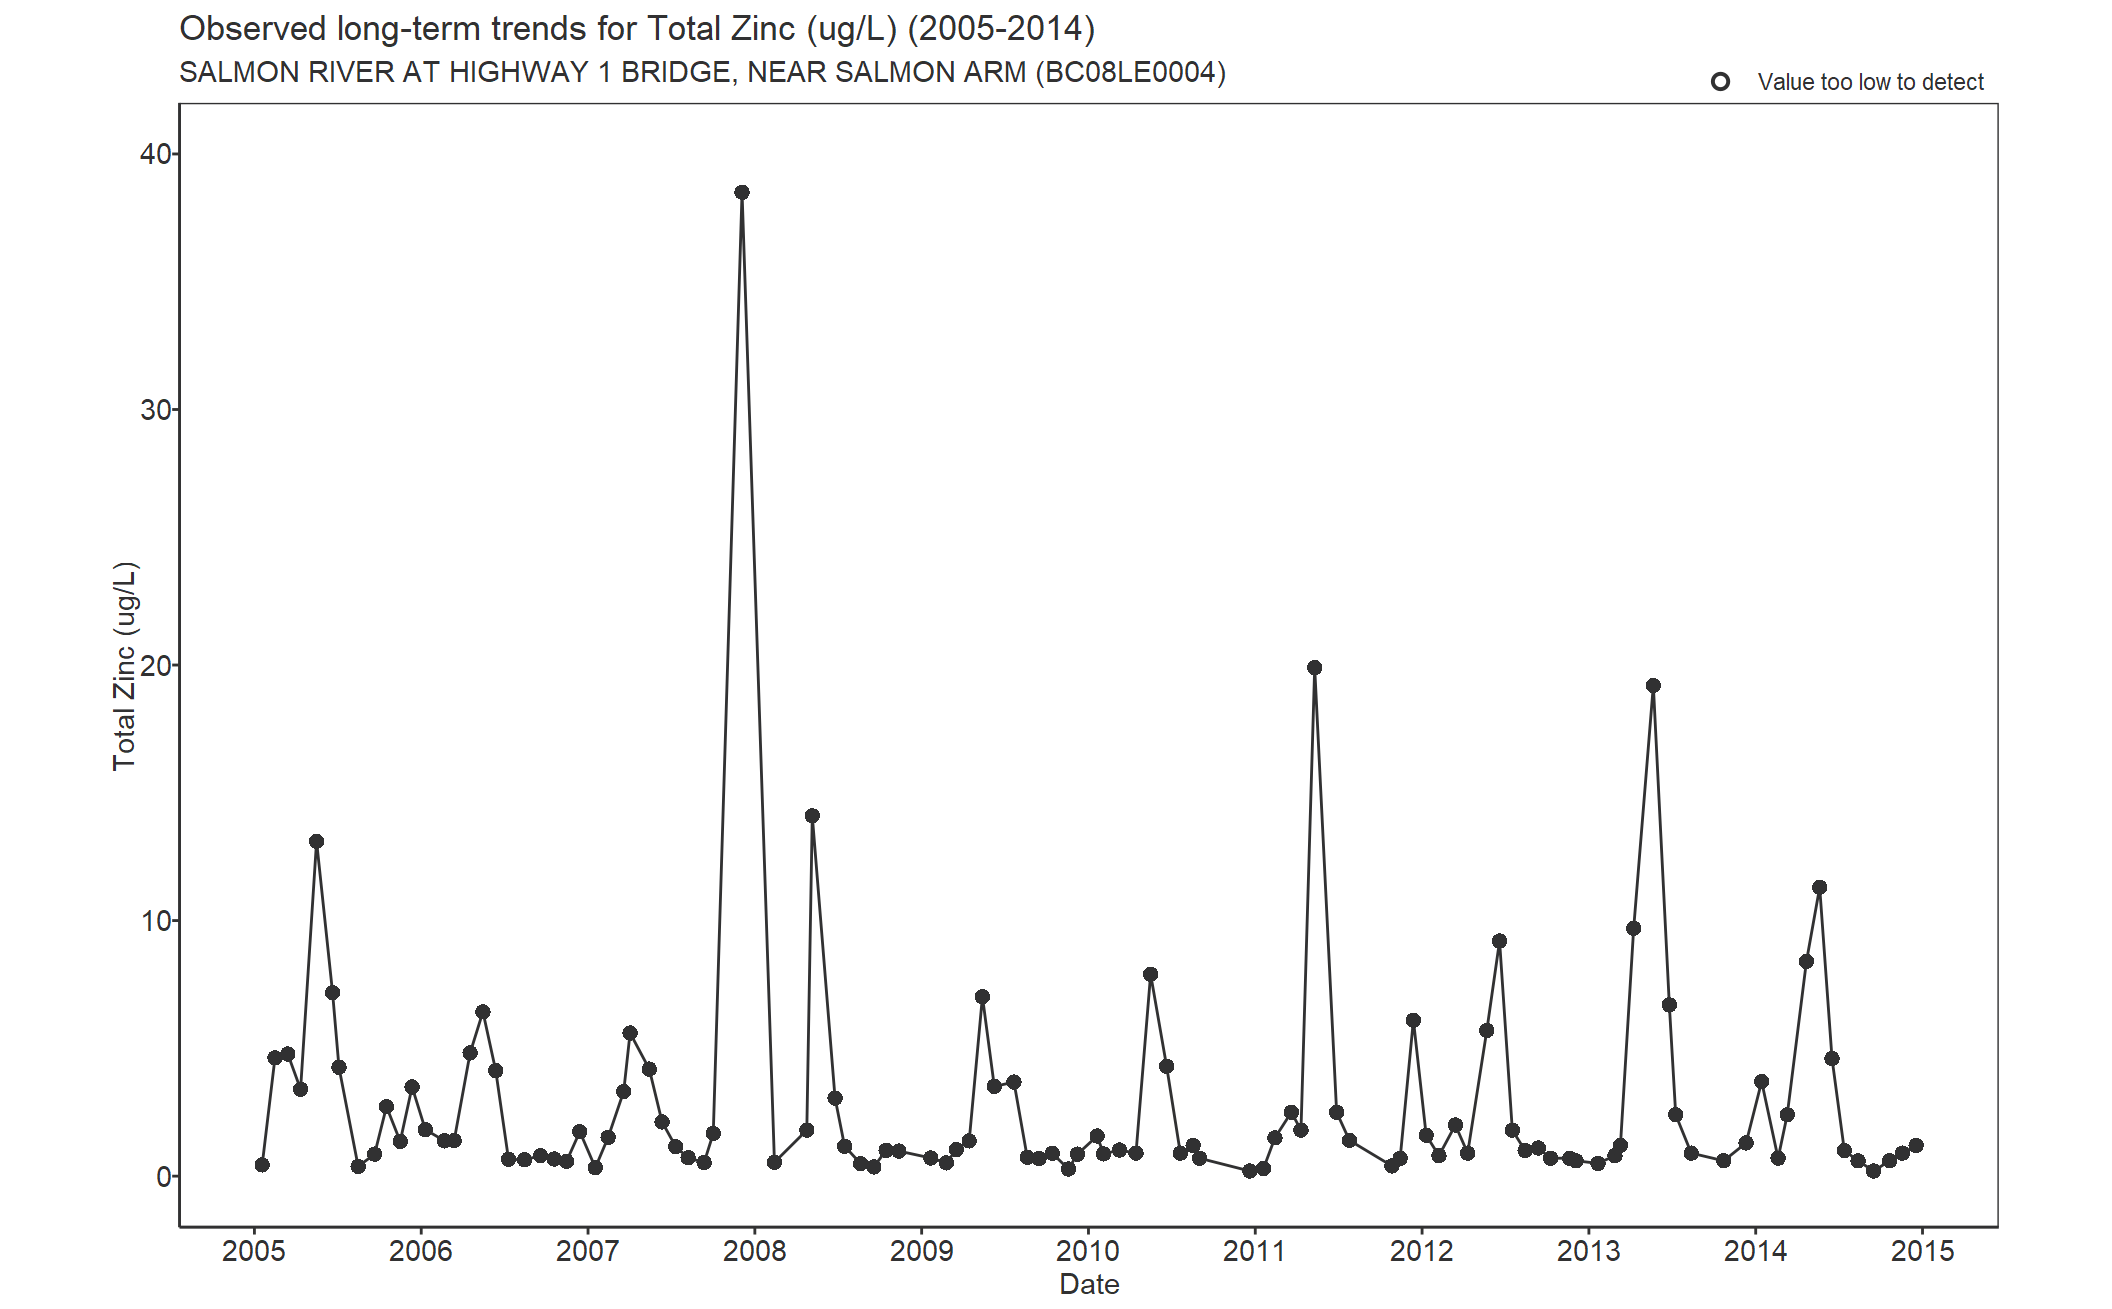 Observed long-term trends for Zinc Total (2005-2014)